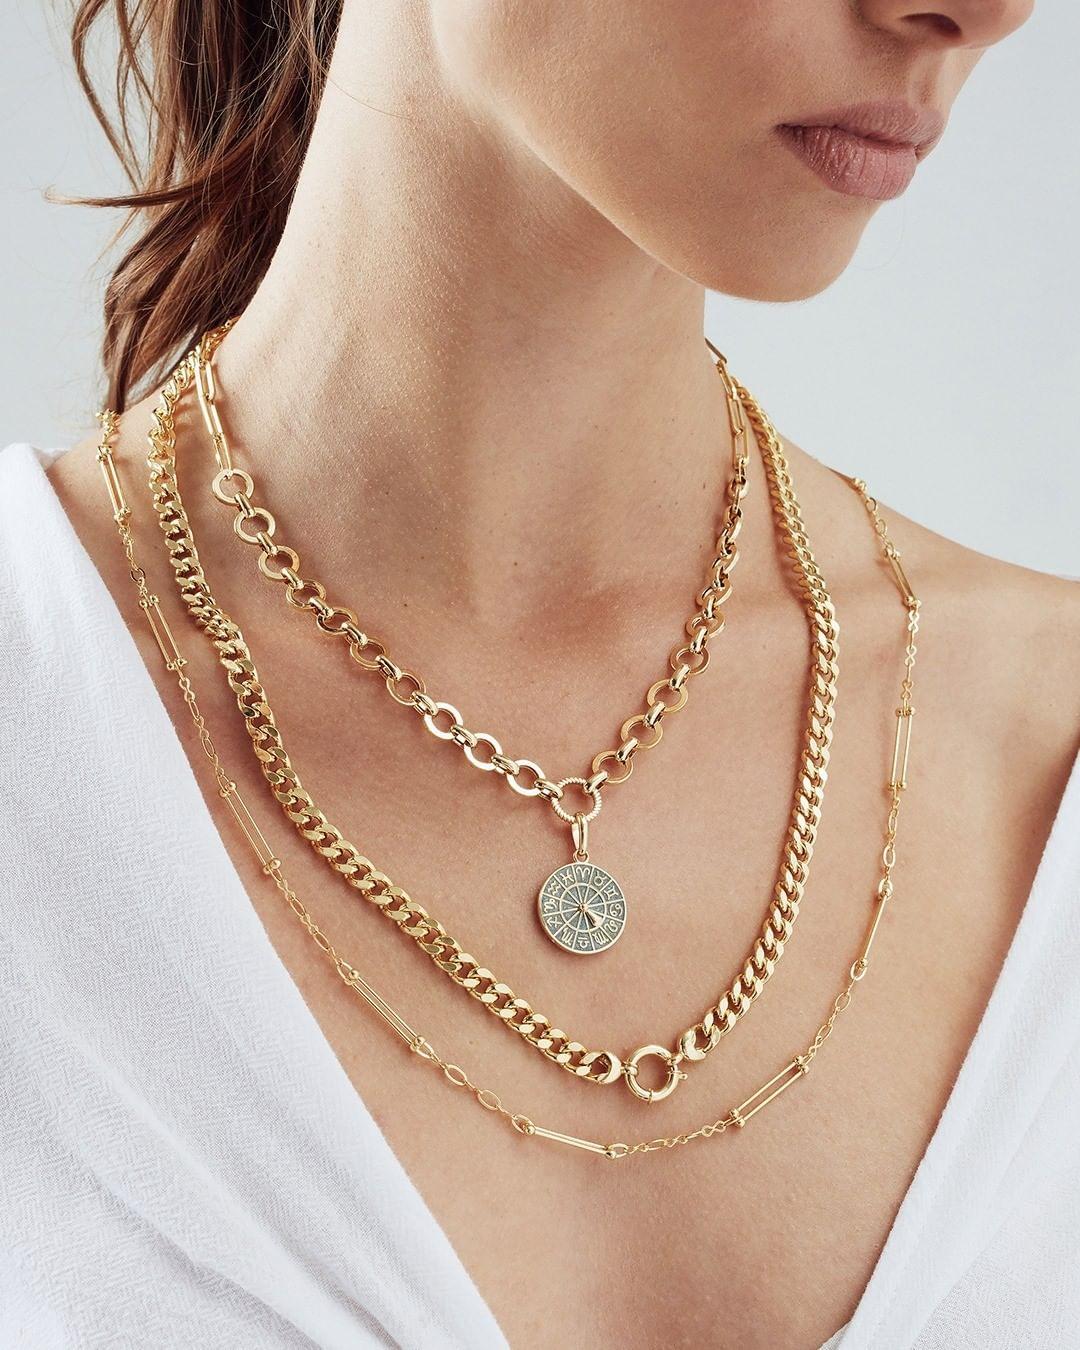 Handmade in New York, our ultra-stylish necklace pays tribute to the unique power of your zodiac sign!
Set your Zodiac Sign, Green Enamel 14K Yellow Gold

Metal: 14K Solid Yellow Gold
Weight: 8.4Gr.
Diameter: 1.8 inches
Chain Lenght: 19.5 inches